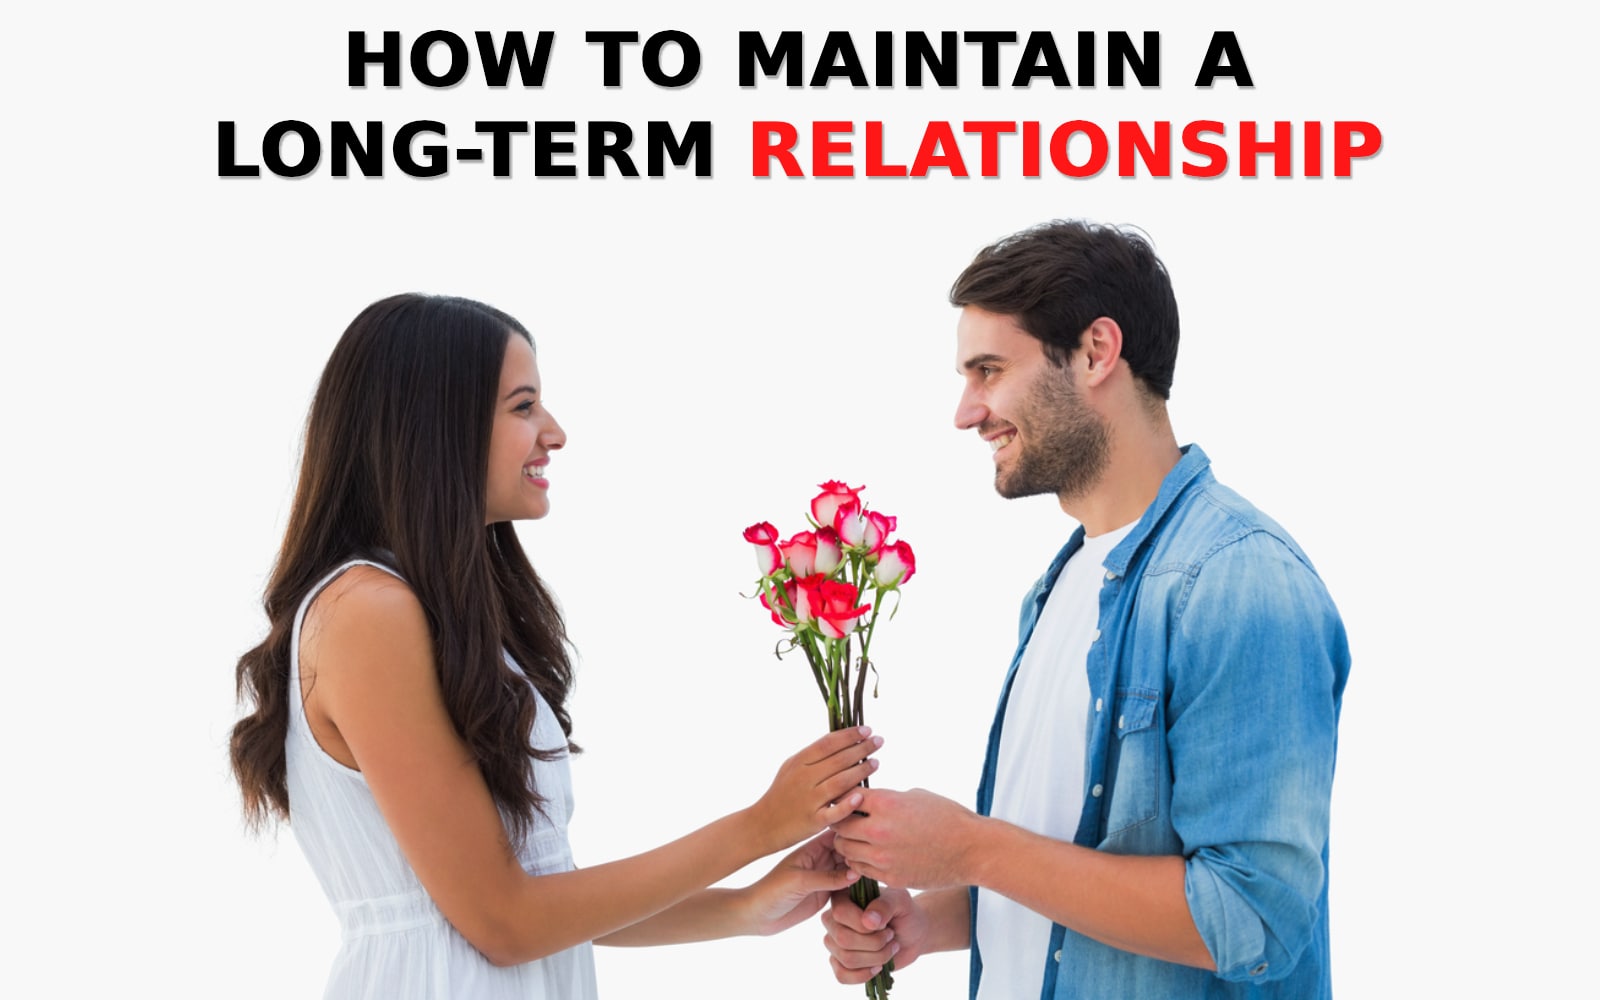 How to Maintain a Long-term Relationship